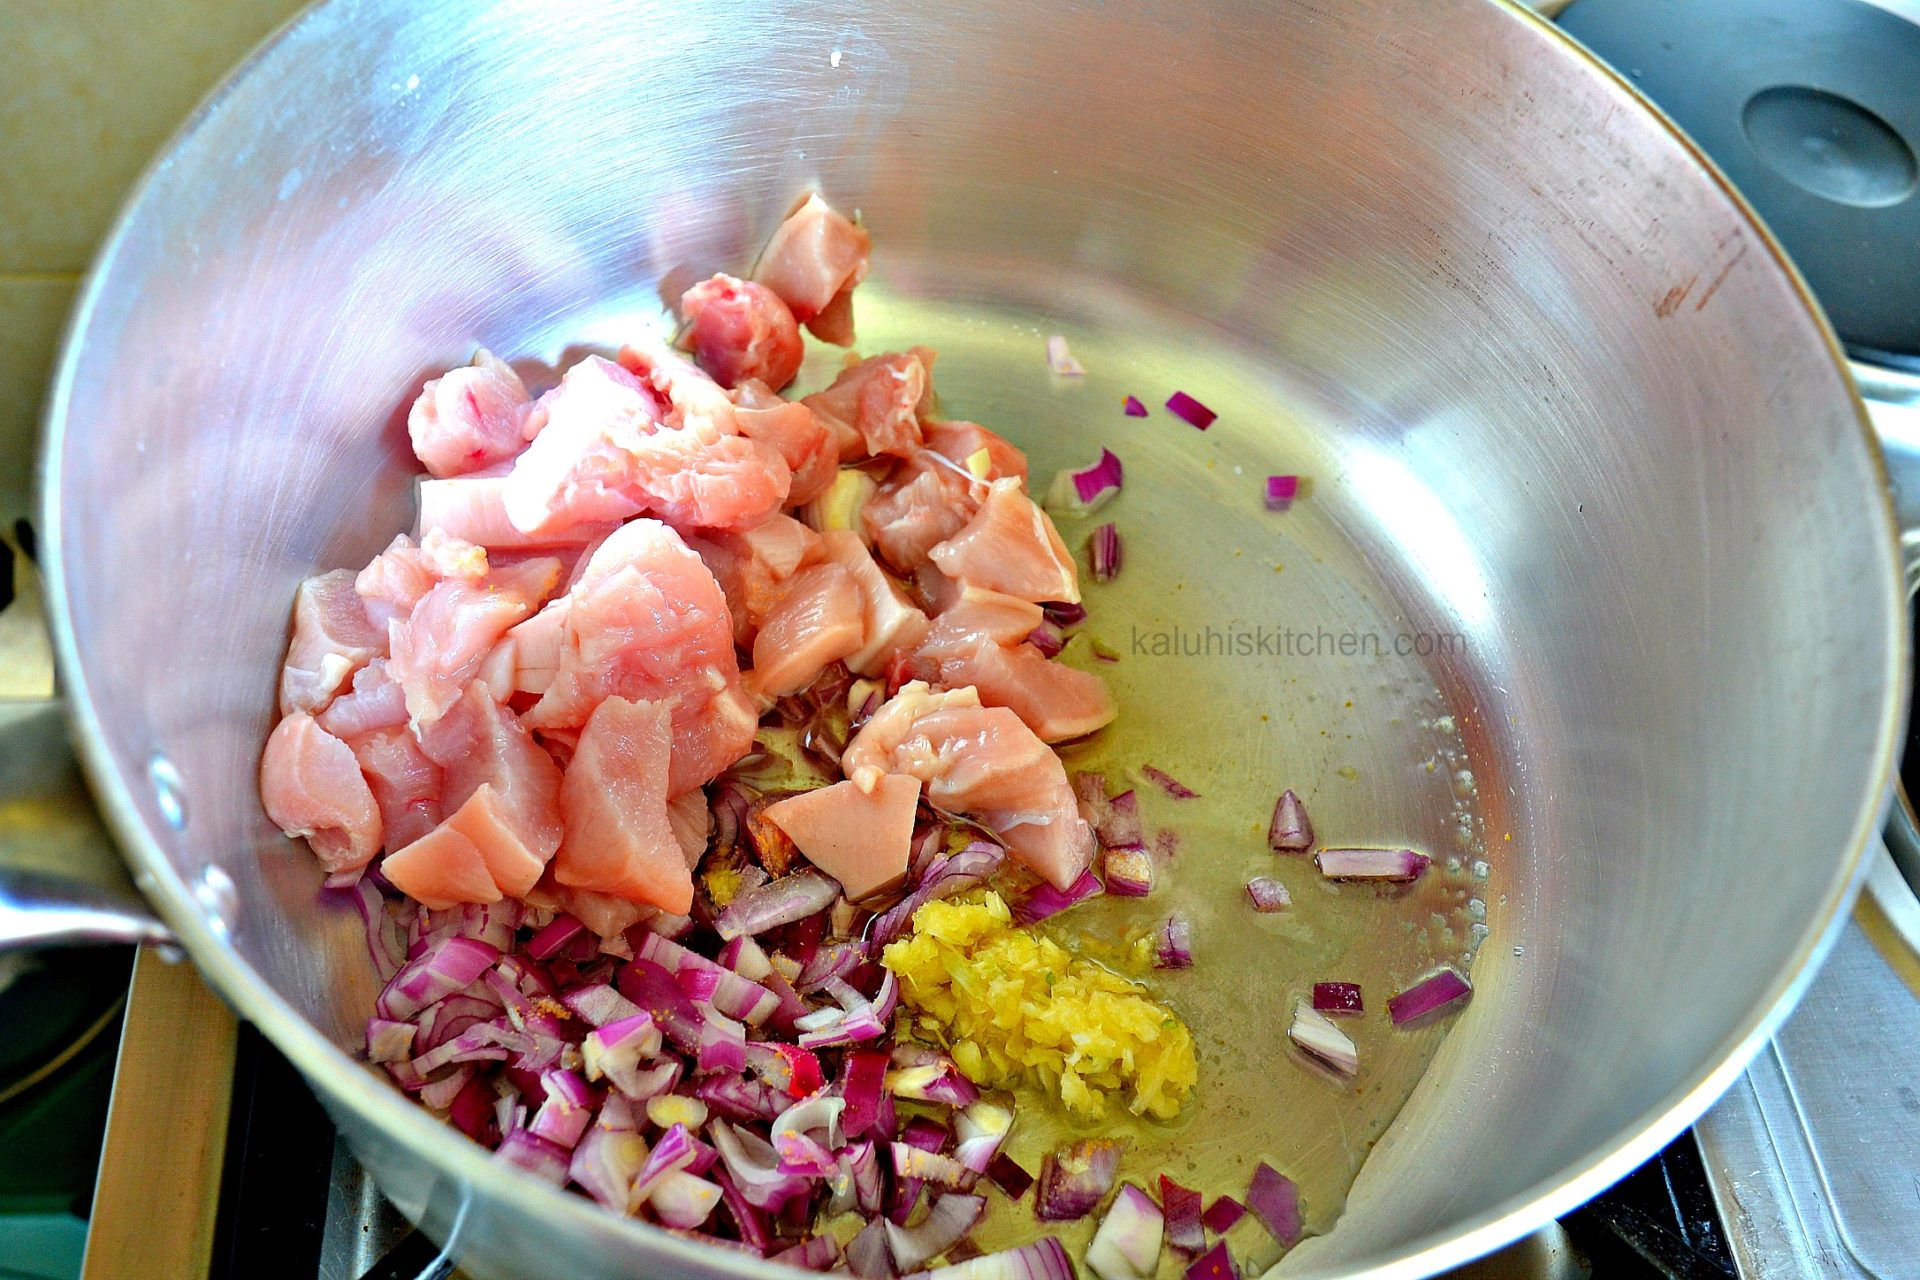 For the chicken pilau, cook the chicken until it has just turned white_kauhiskitchen.com